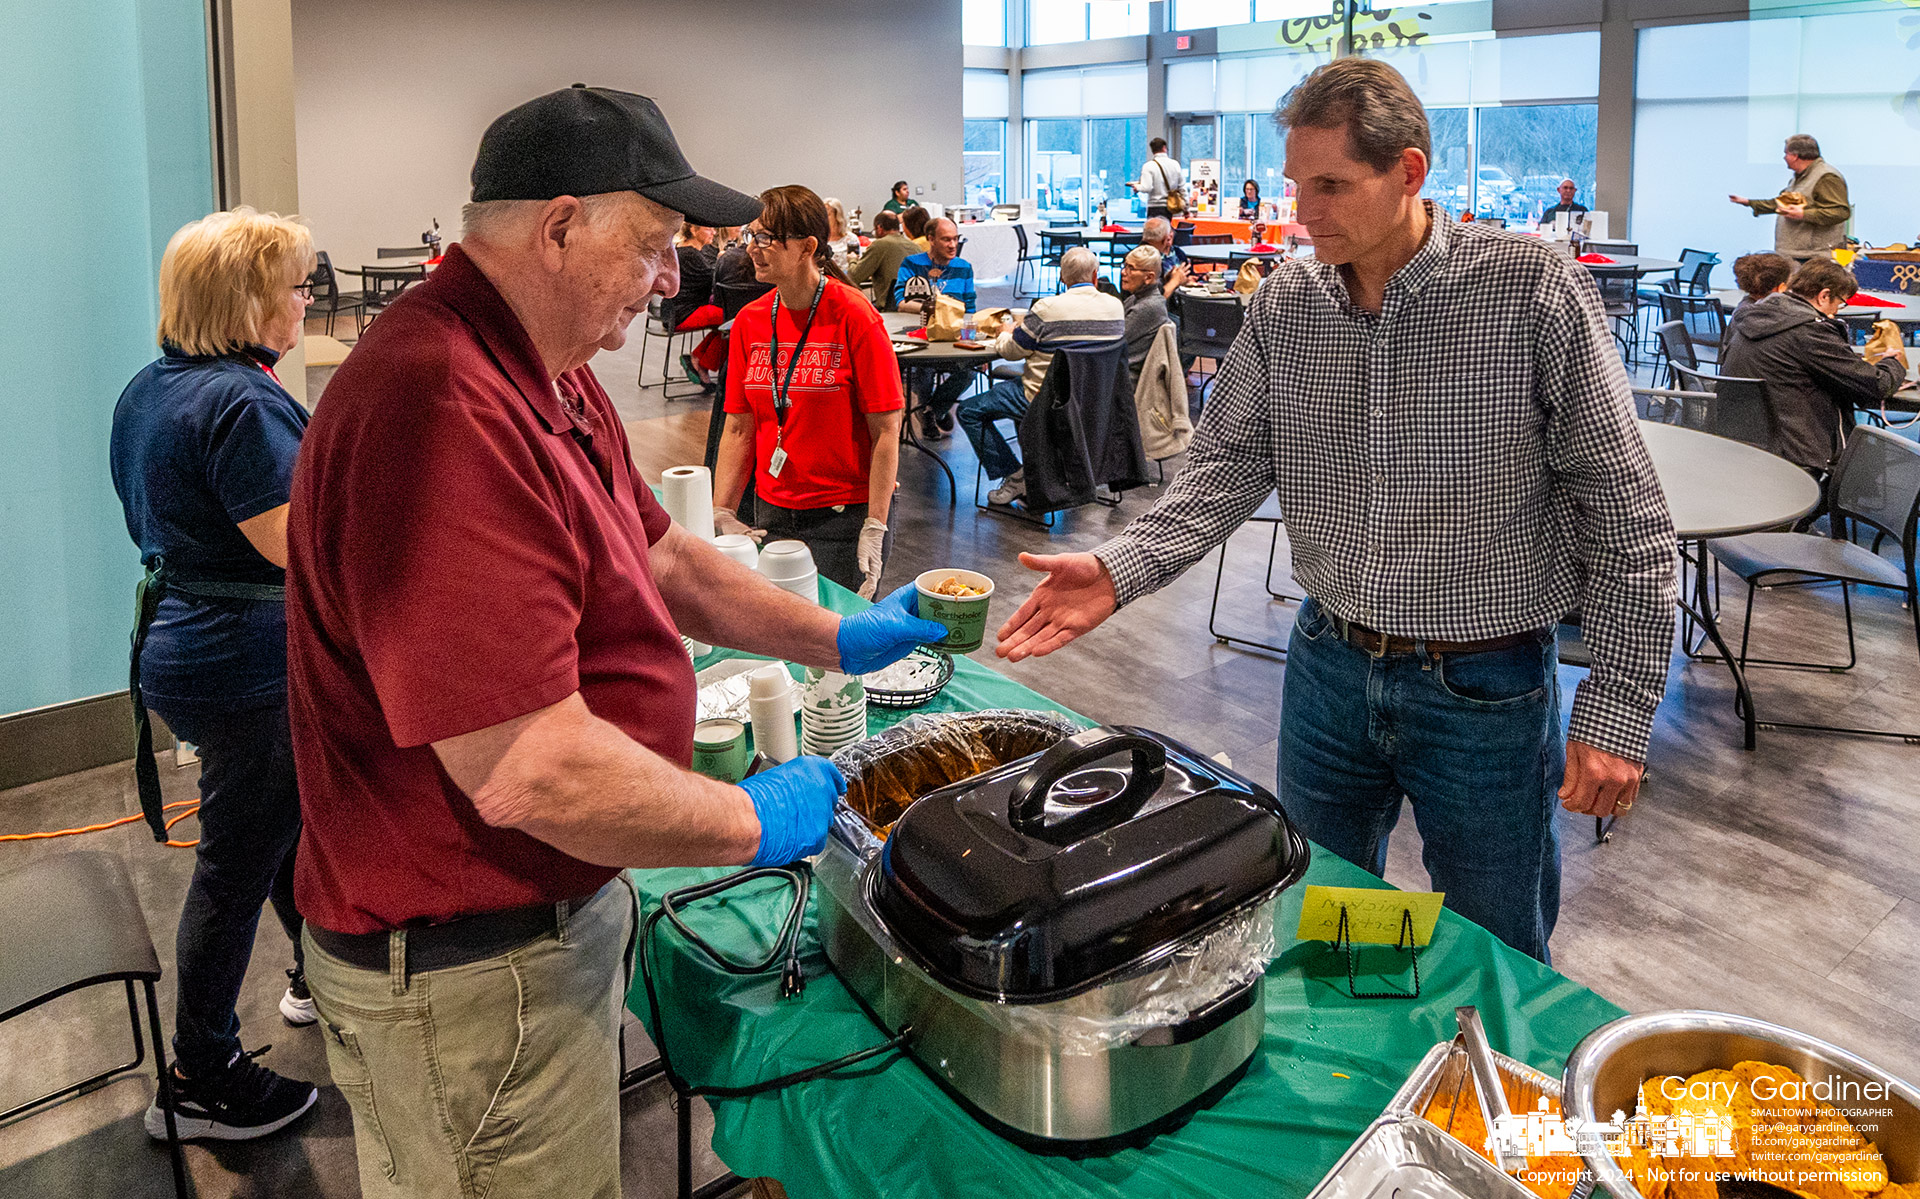 A man is served homemade chicken tortilla soup by the chef at Souperbowl Dinner to raise money for W.A.R.M. at the Senior Center in the Community Center. My Final Photo for February 8, 2023.